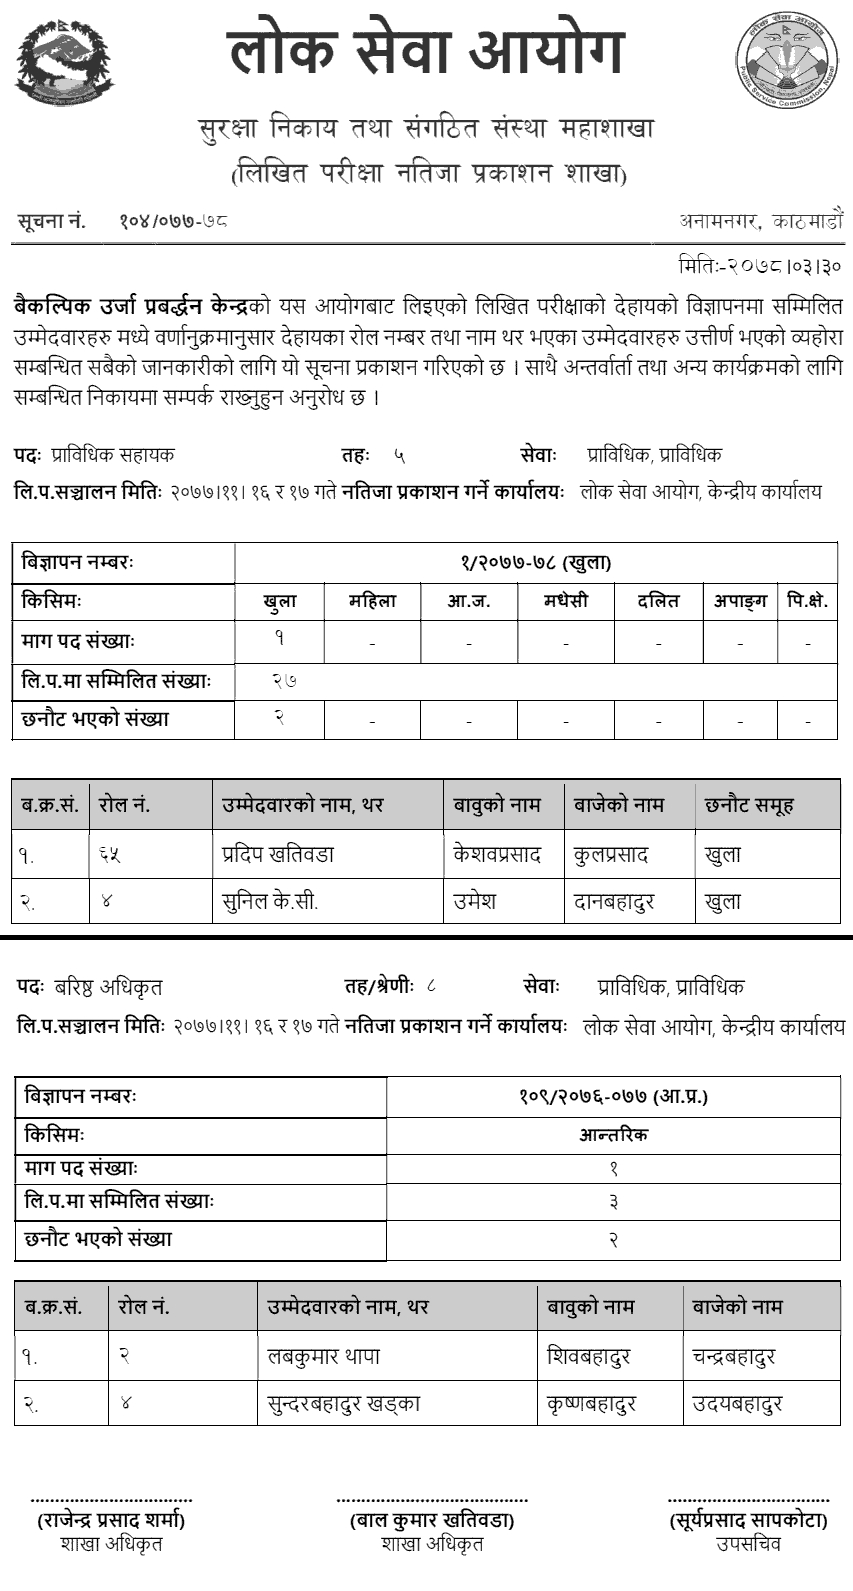 Alternative Energy Promotion Centre (AEPC) 5th Level Assistant Written Exam Result Published